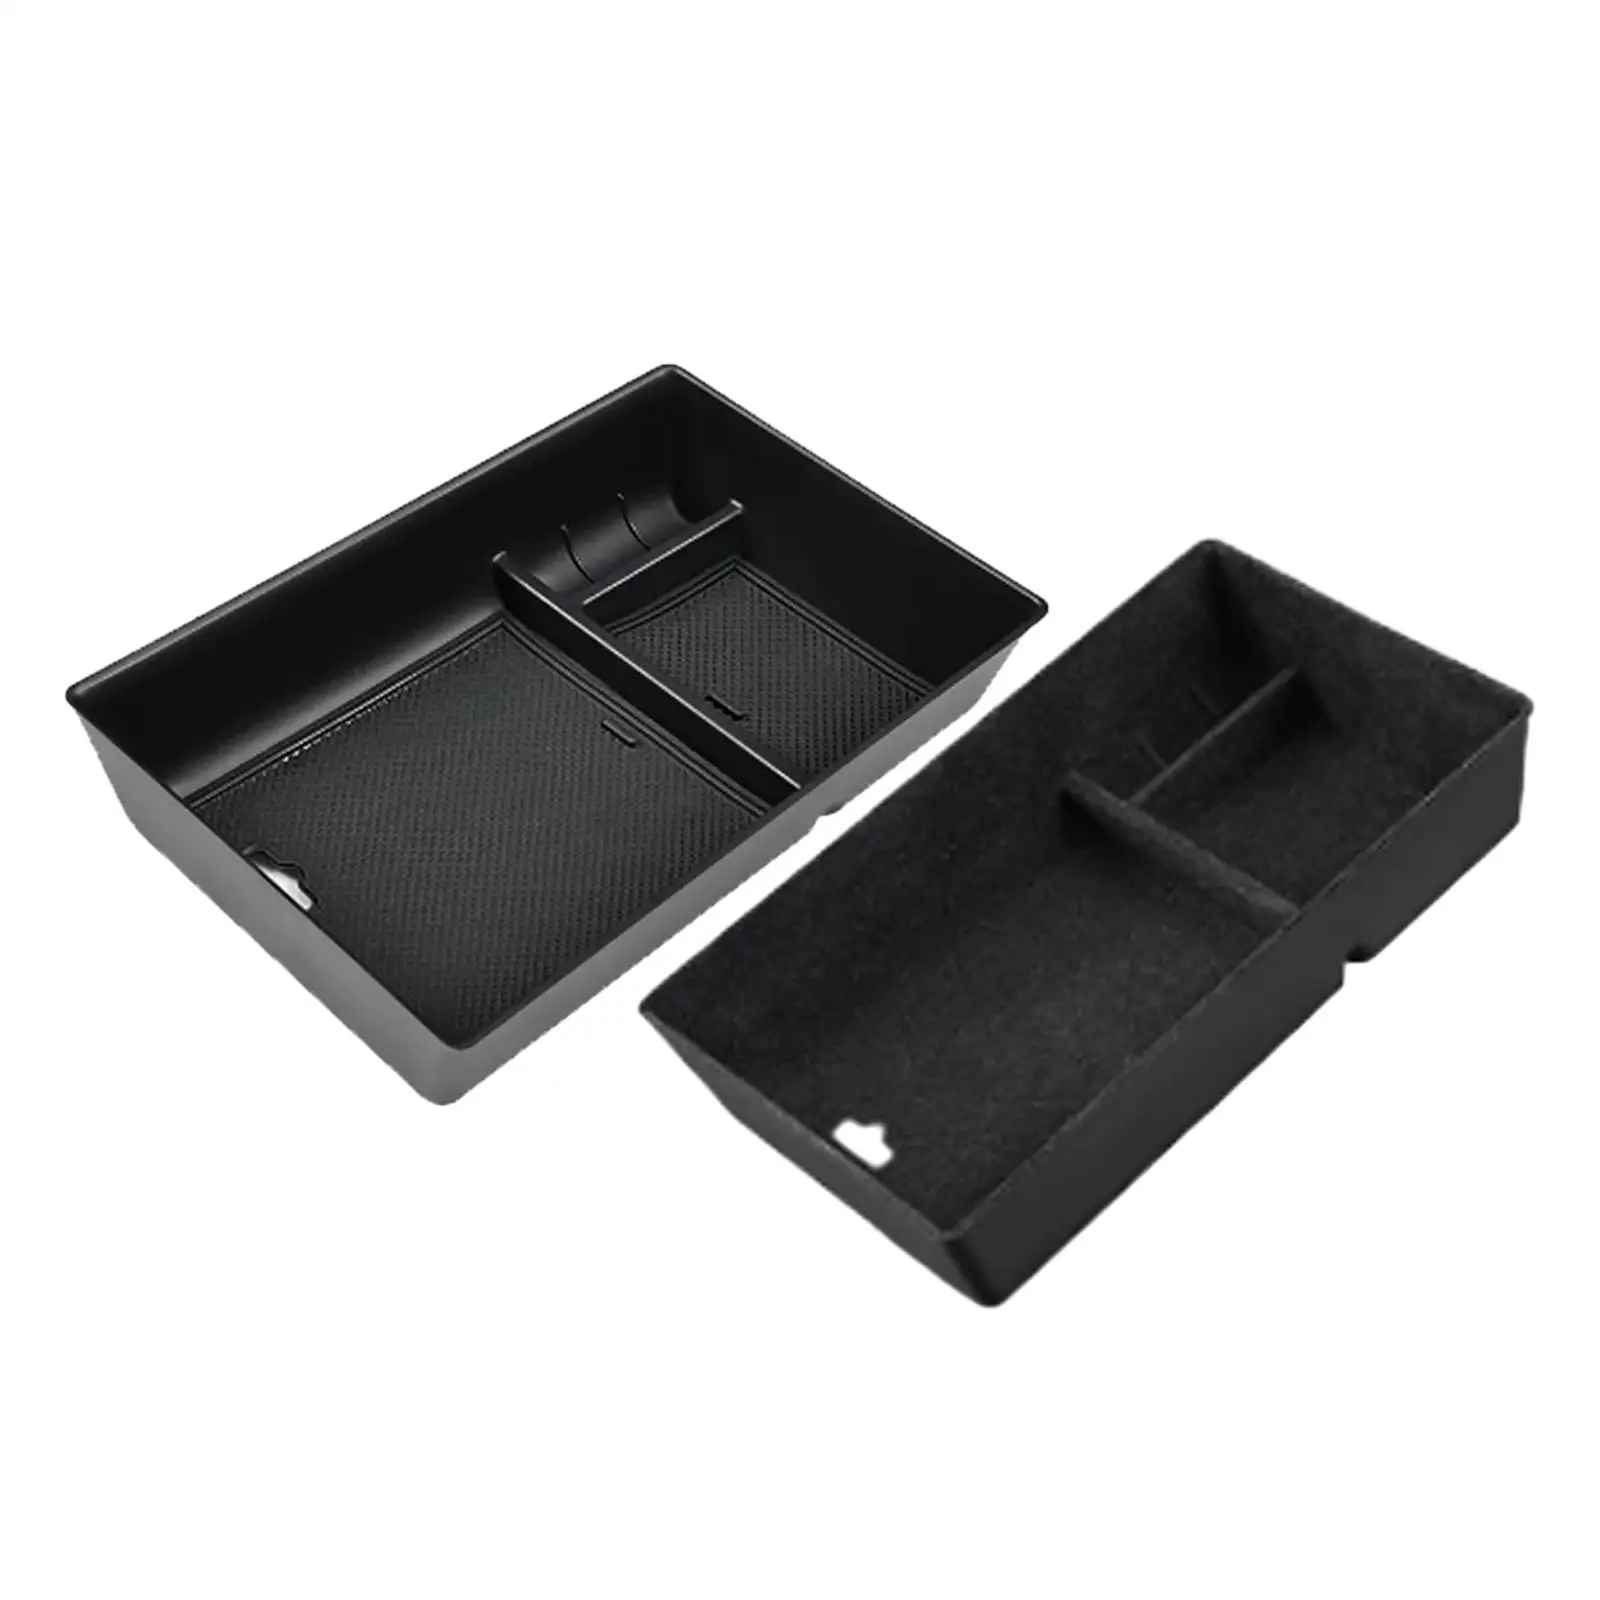 Armrest Storage Practical Car Accessory Keep Organized Storage Tray for Mercedes Benz 2022 to 2024 Replacement Easily Install